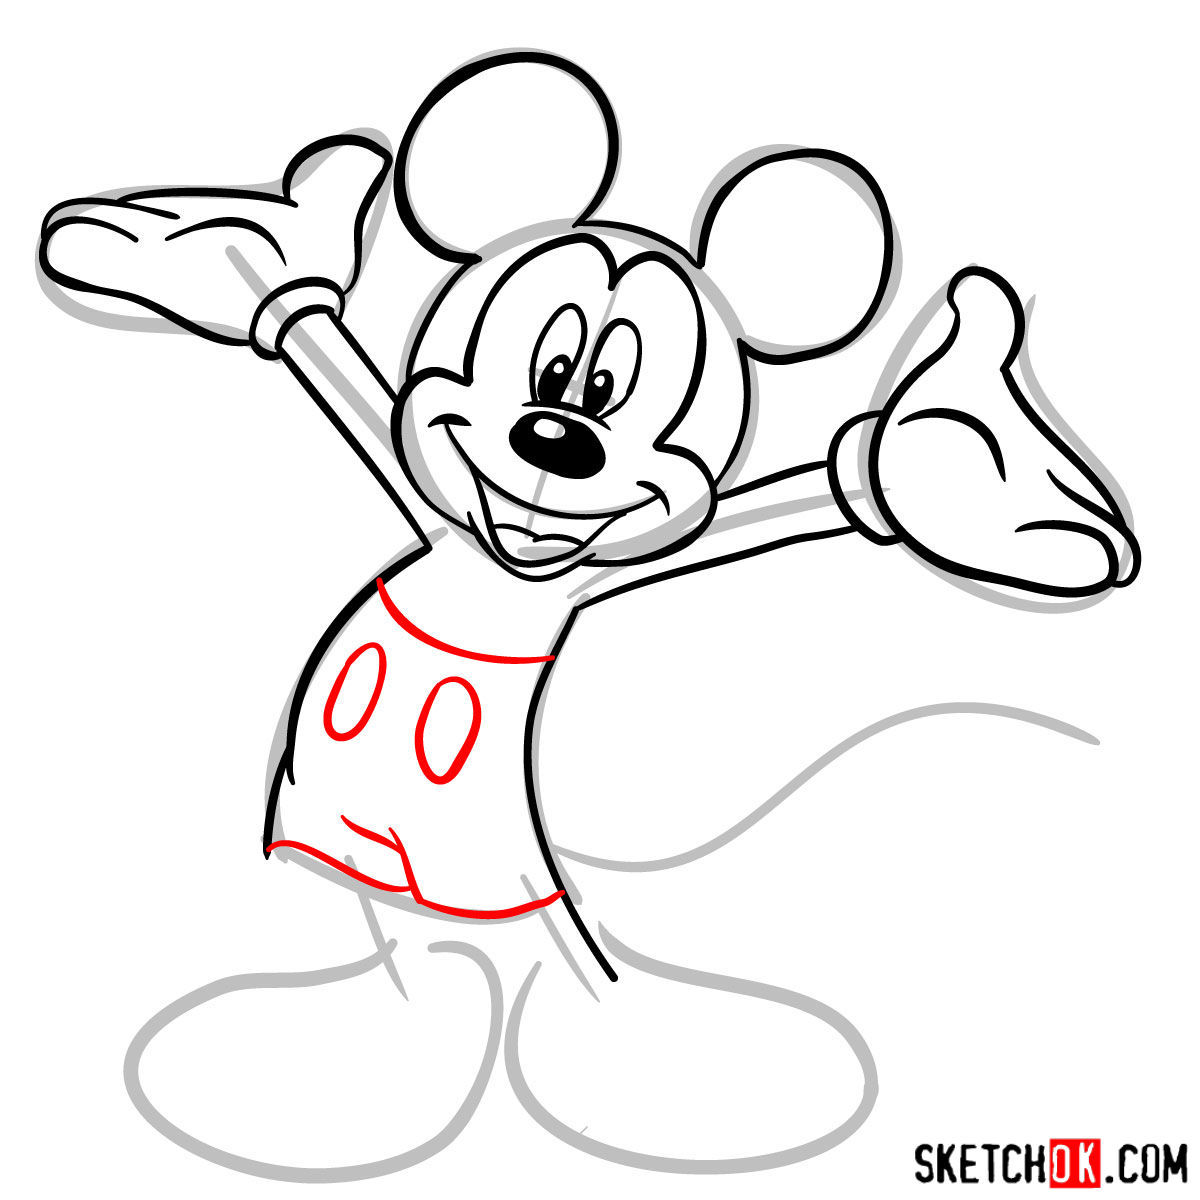 How to draw Mickey Mouse - step 08